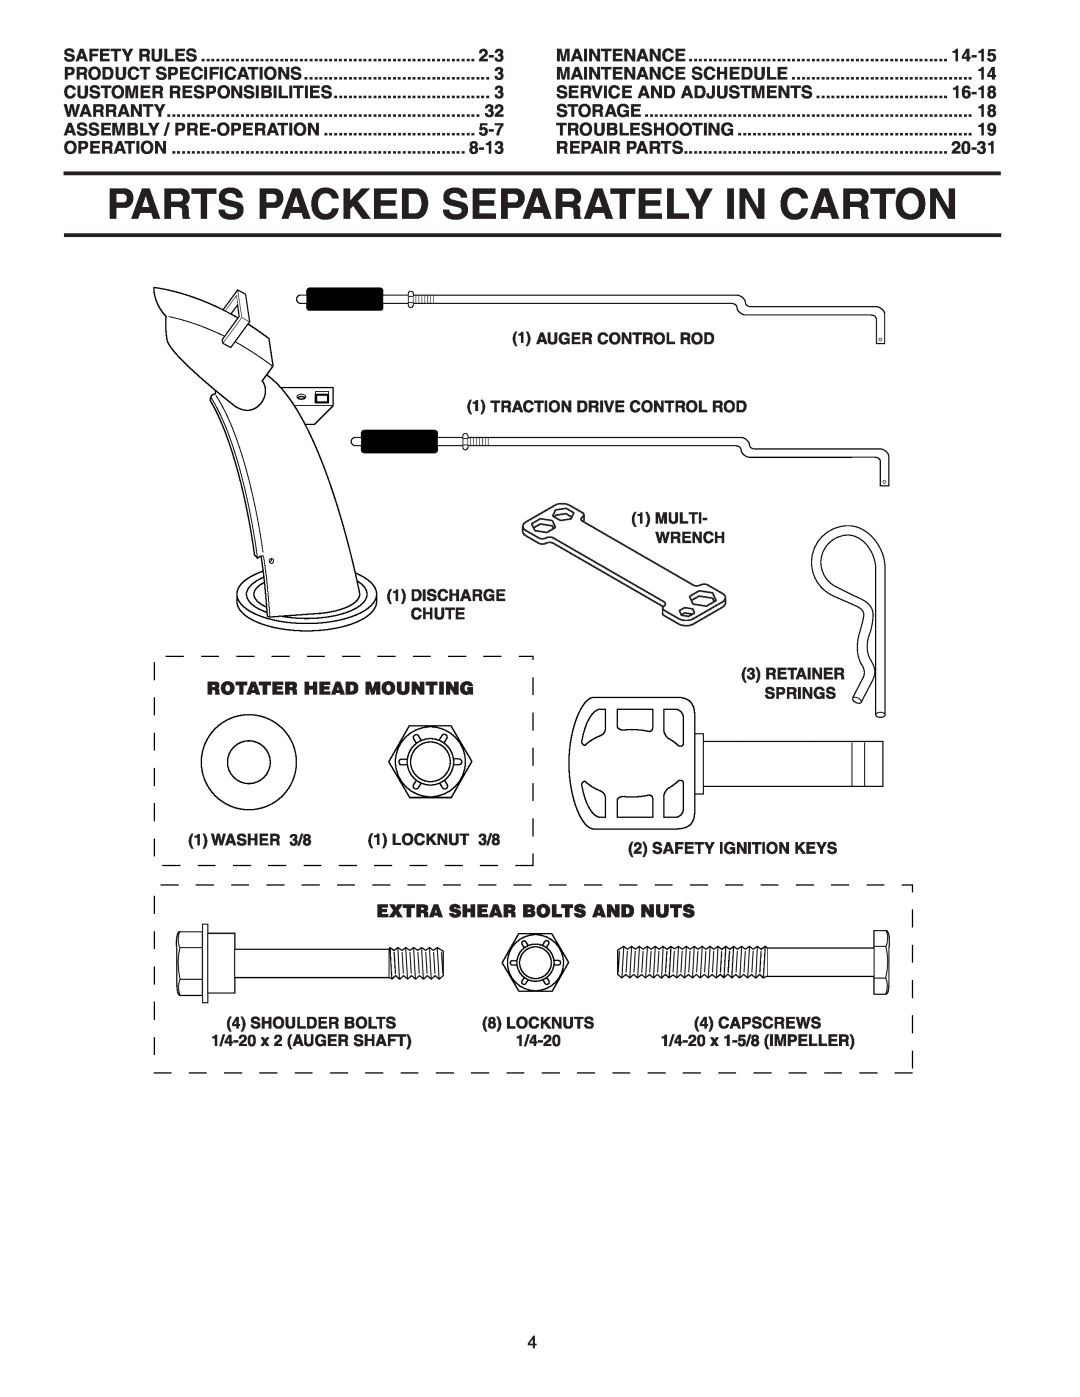 Poulan PP8527ESA owner manual Parts Packed Separately In Carton, 8-13, 14-15, Service And Adjustments, 16-18, 20-31 